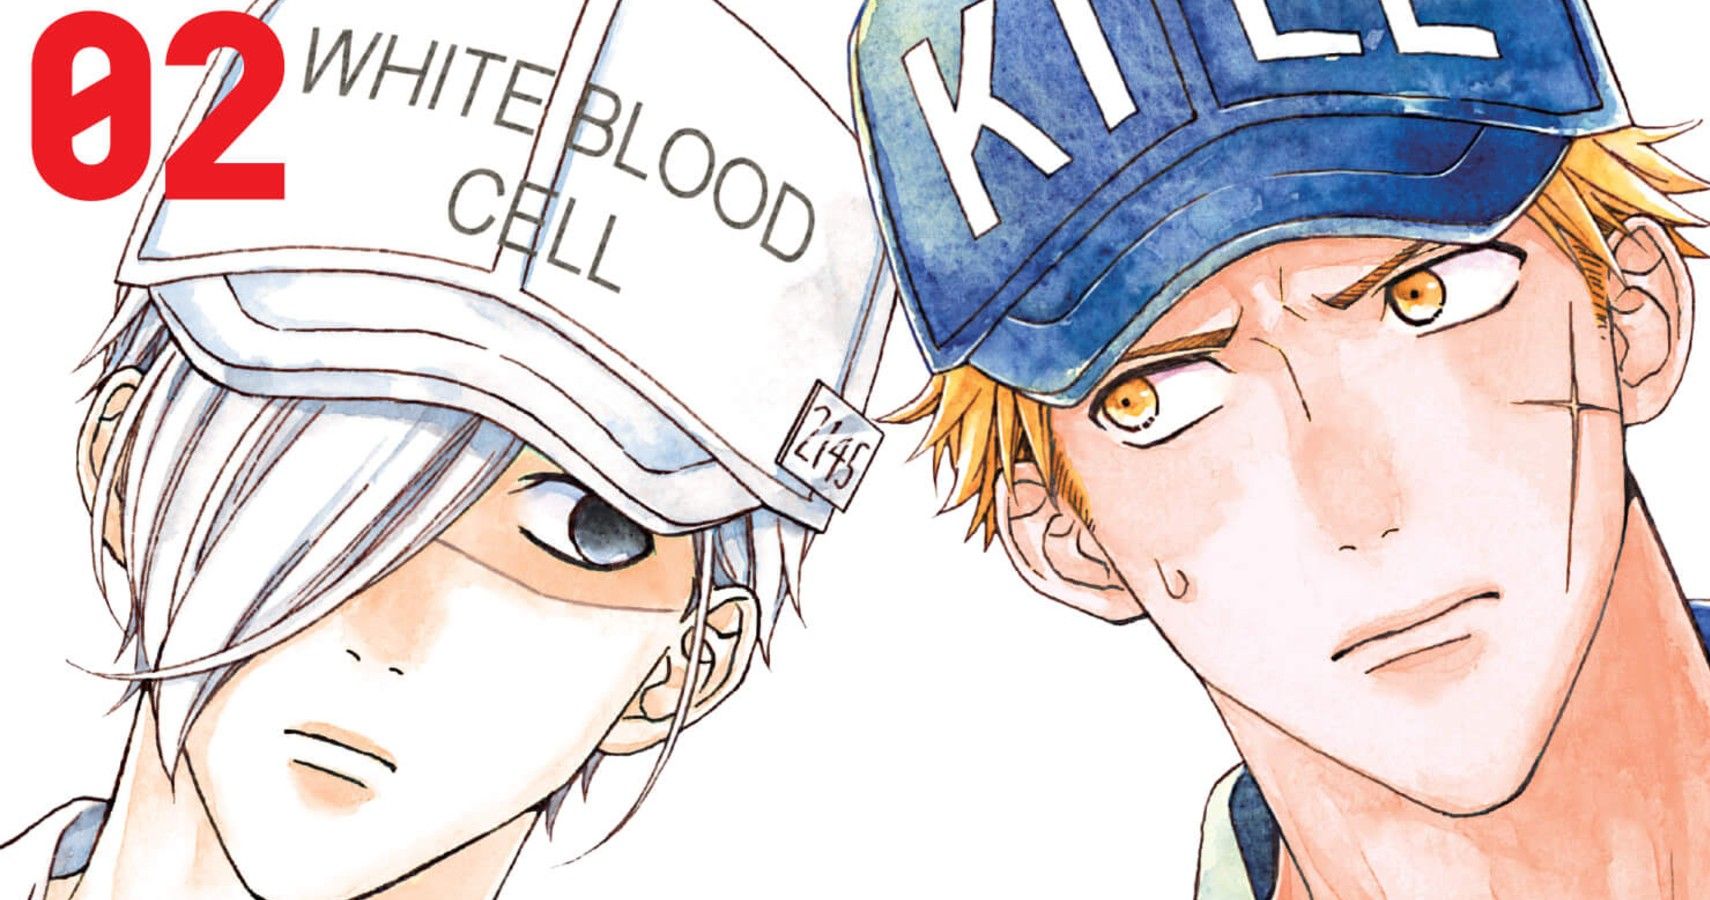 Cells At Work And Friends